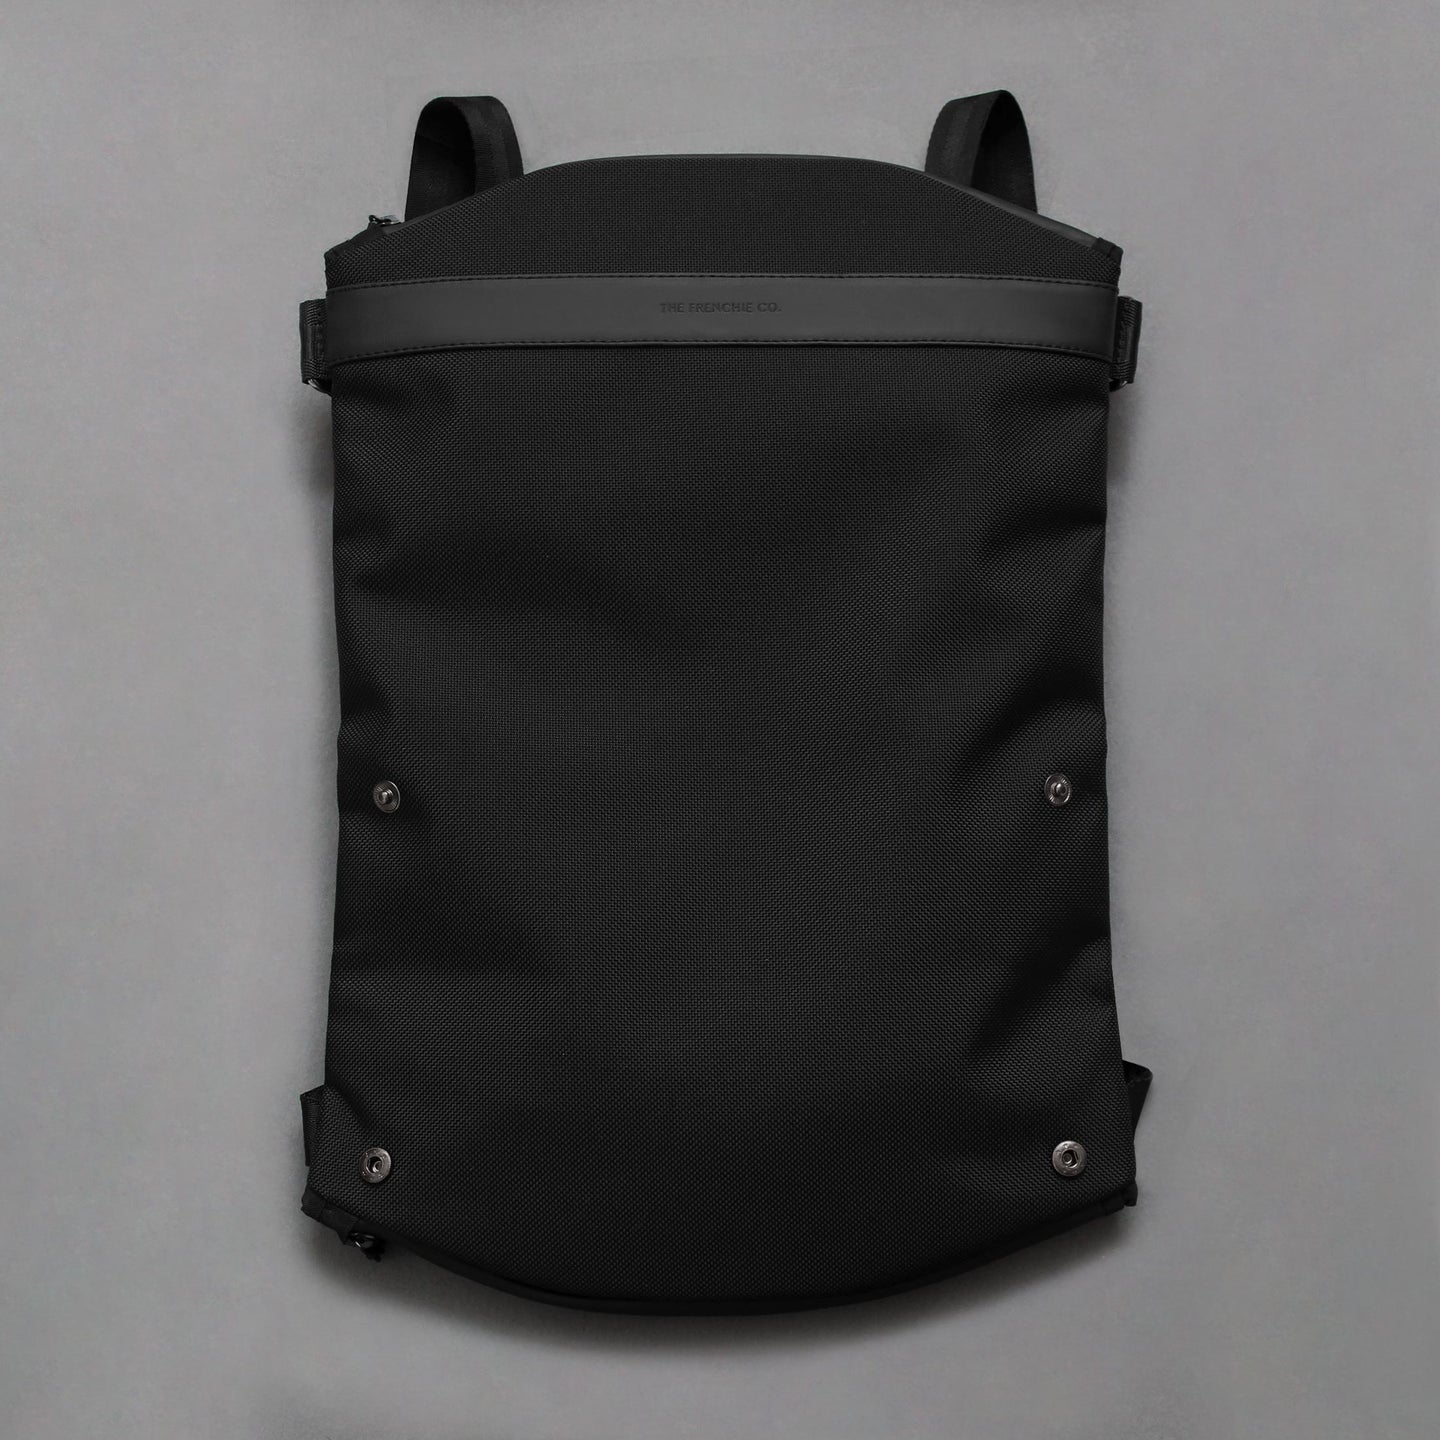 the Frenchie co. - 3 in 1 Sling / Backpack - Storming Gravity